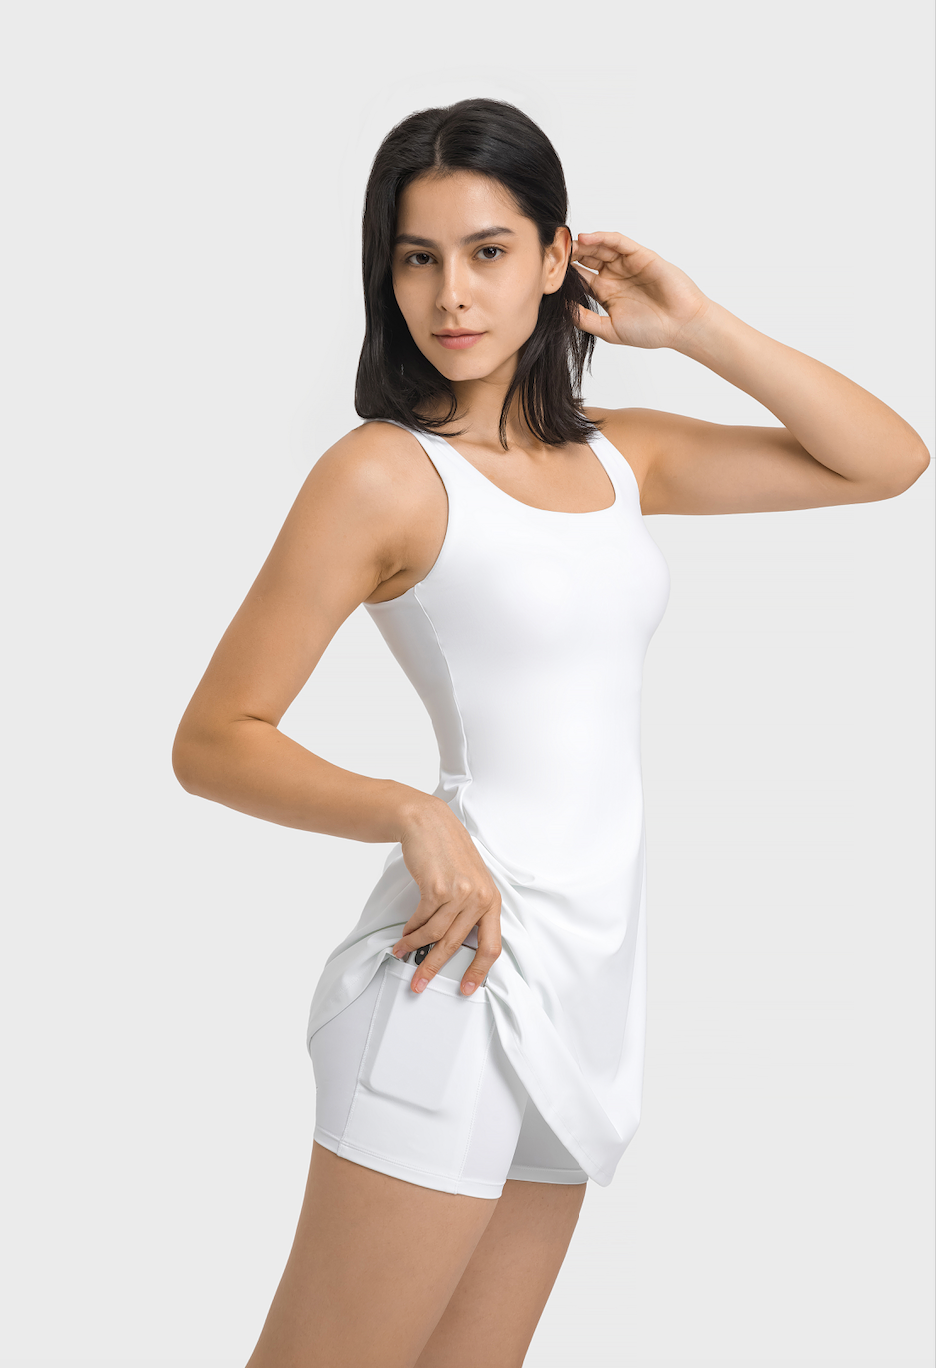 I Am Fearless Comfort Tennis Dress in Ivory